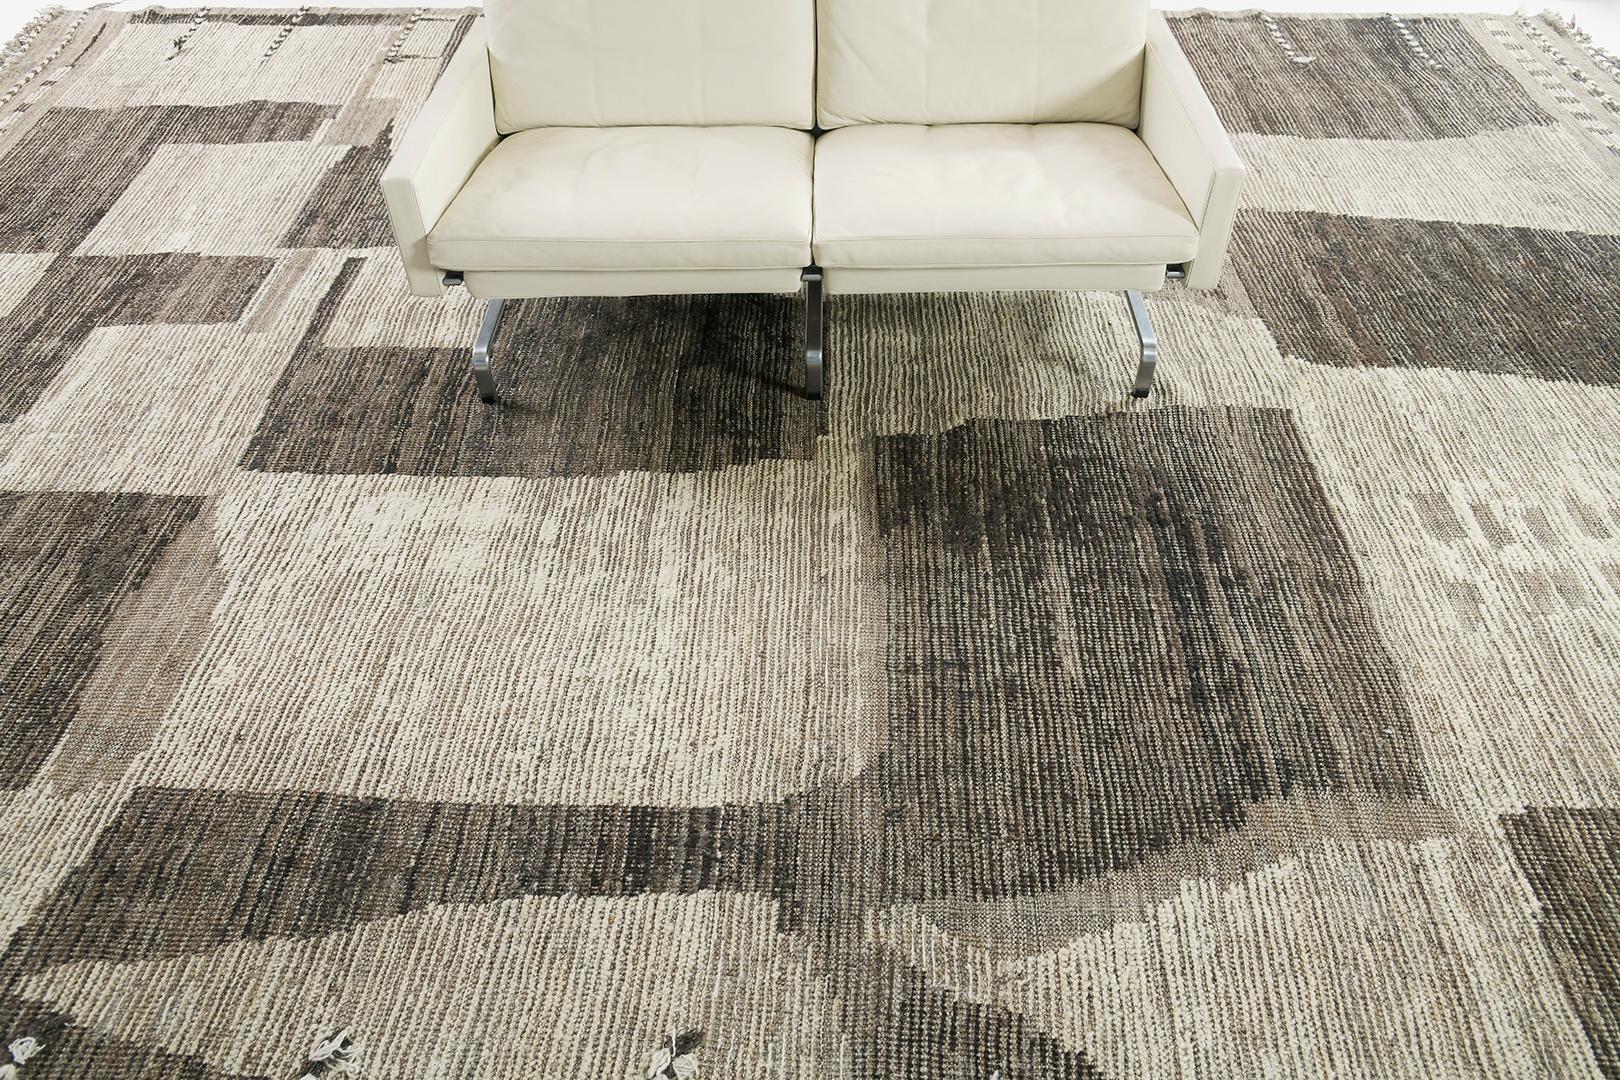 Akal rug is a handwoven wool piece inspired by Scandinavian design elements for the modern design world. The rug's shag balance and harmony, handwoven with neutral shades of taupe and beige pile weave. This collection, Mehraban's Atlas collection is